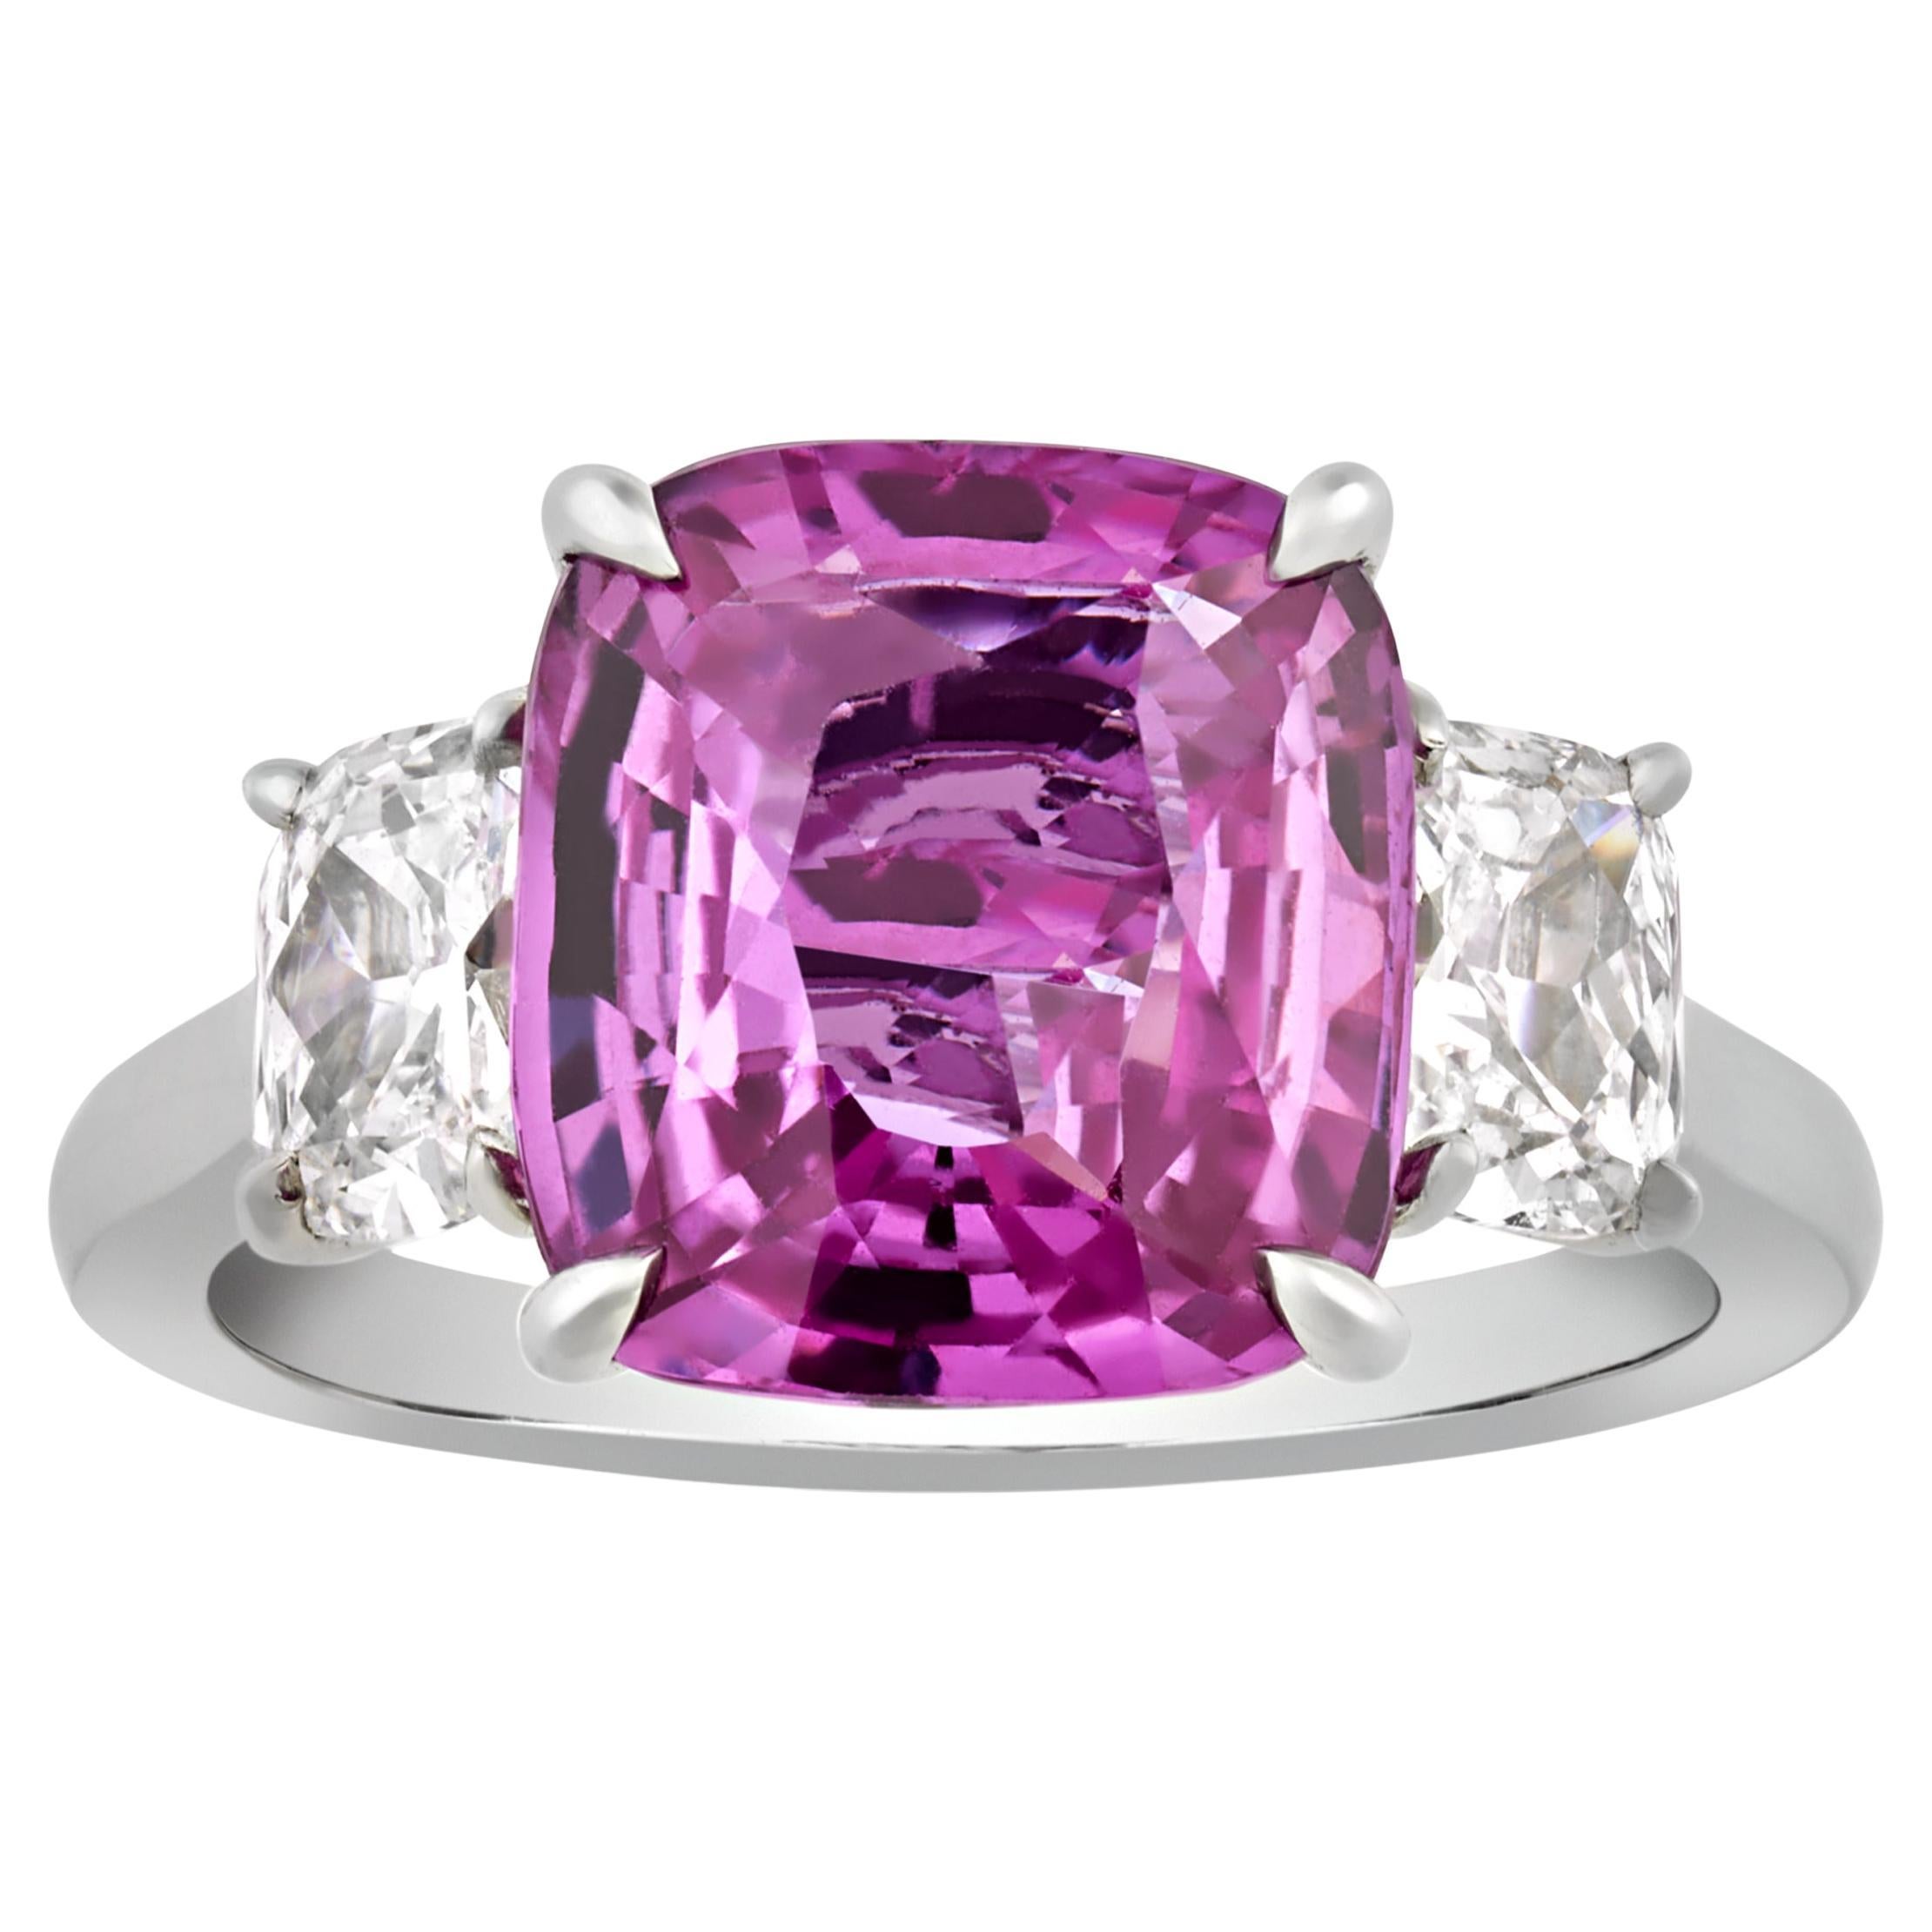 Untreated Pink Sapphire Ring, 5.07 Carats